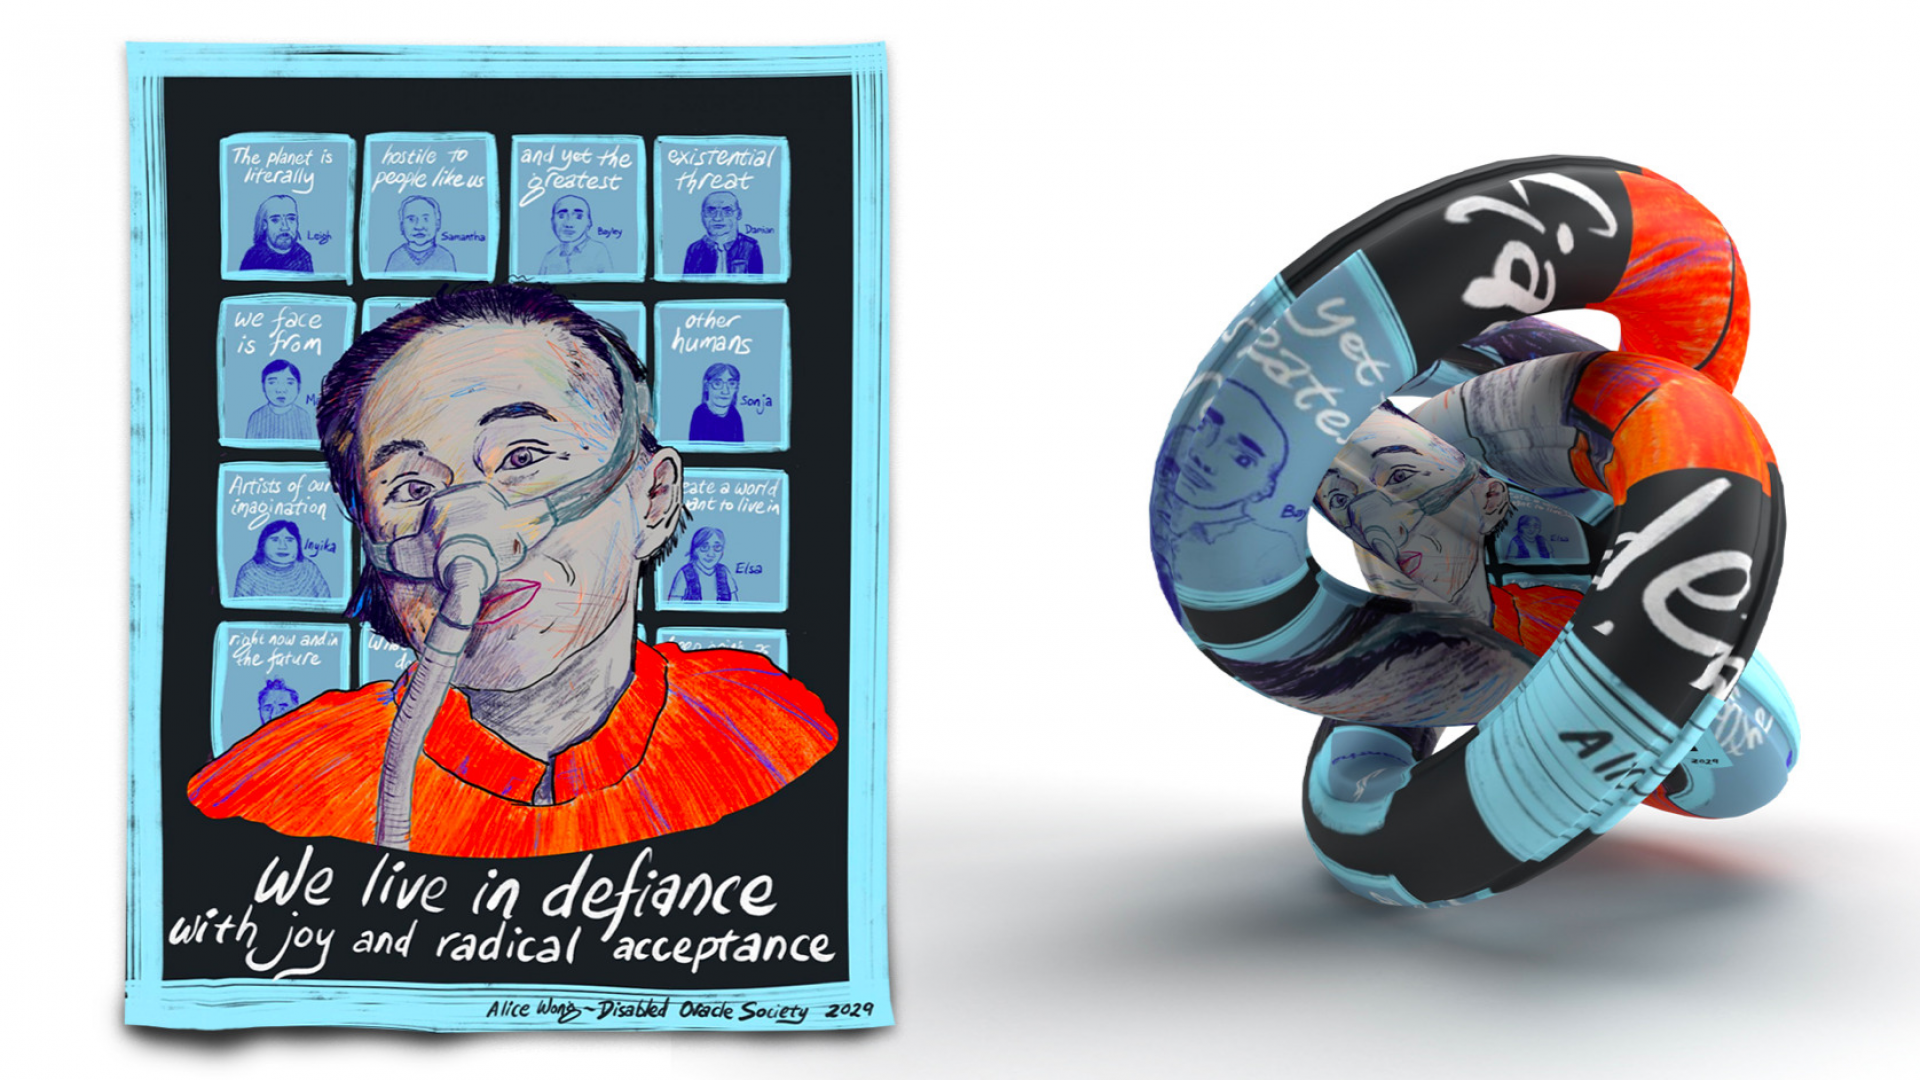 On the left is a poster featuring an Asian woman from the shoulders up, wearing an oxygen mask over her nose and a bright red shirt, in front of a series of tiled, blue thumbnail illustrations of a diverse range of people. Below her in white writing on black backround is the statement 'we live in defiance with joy and radical acceptance'. On the right is a design object resembling bangles coiled infinitely around one another, made from the poster and picking up on the blue, black and red colours from the left hand image.